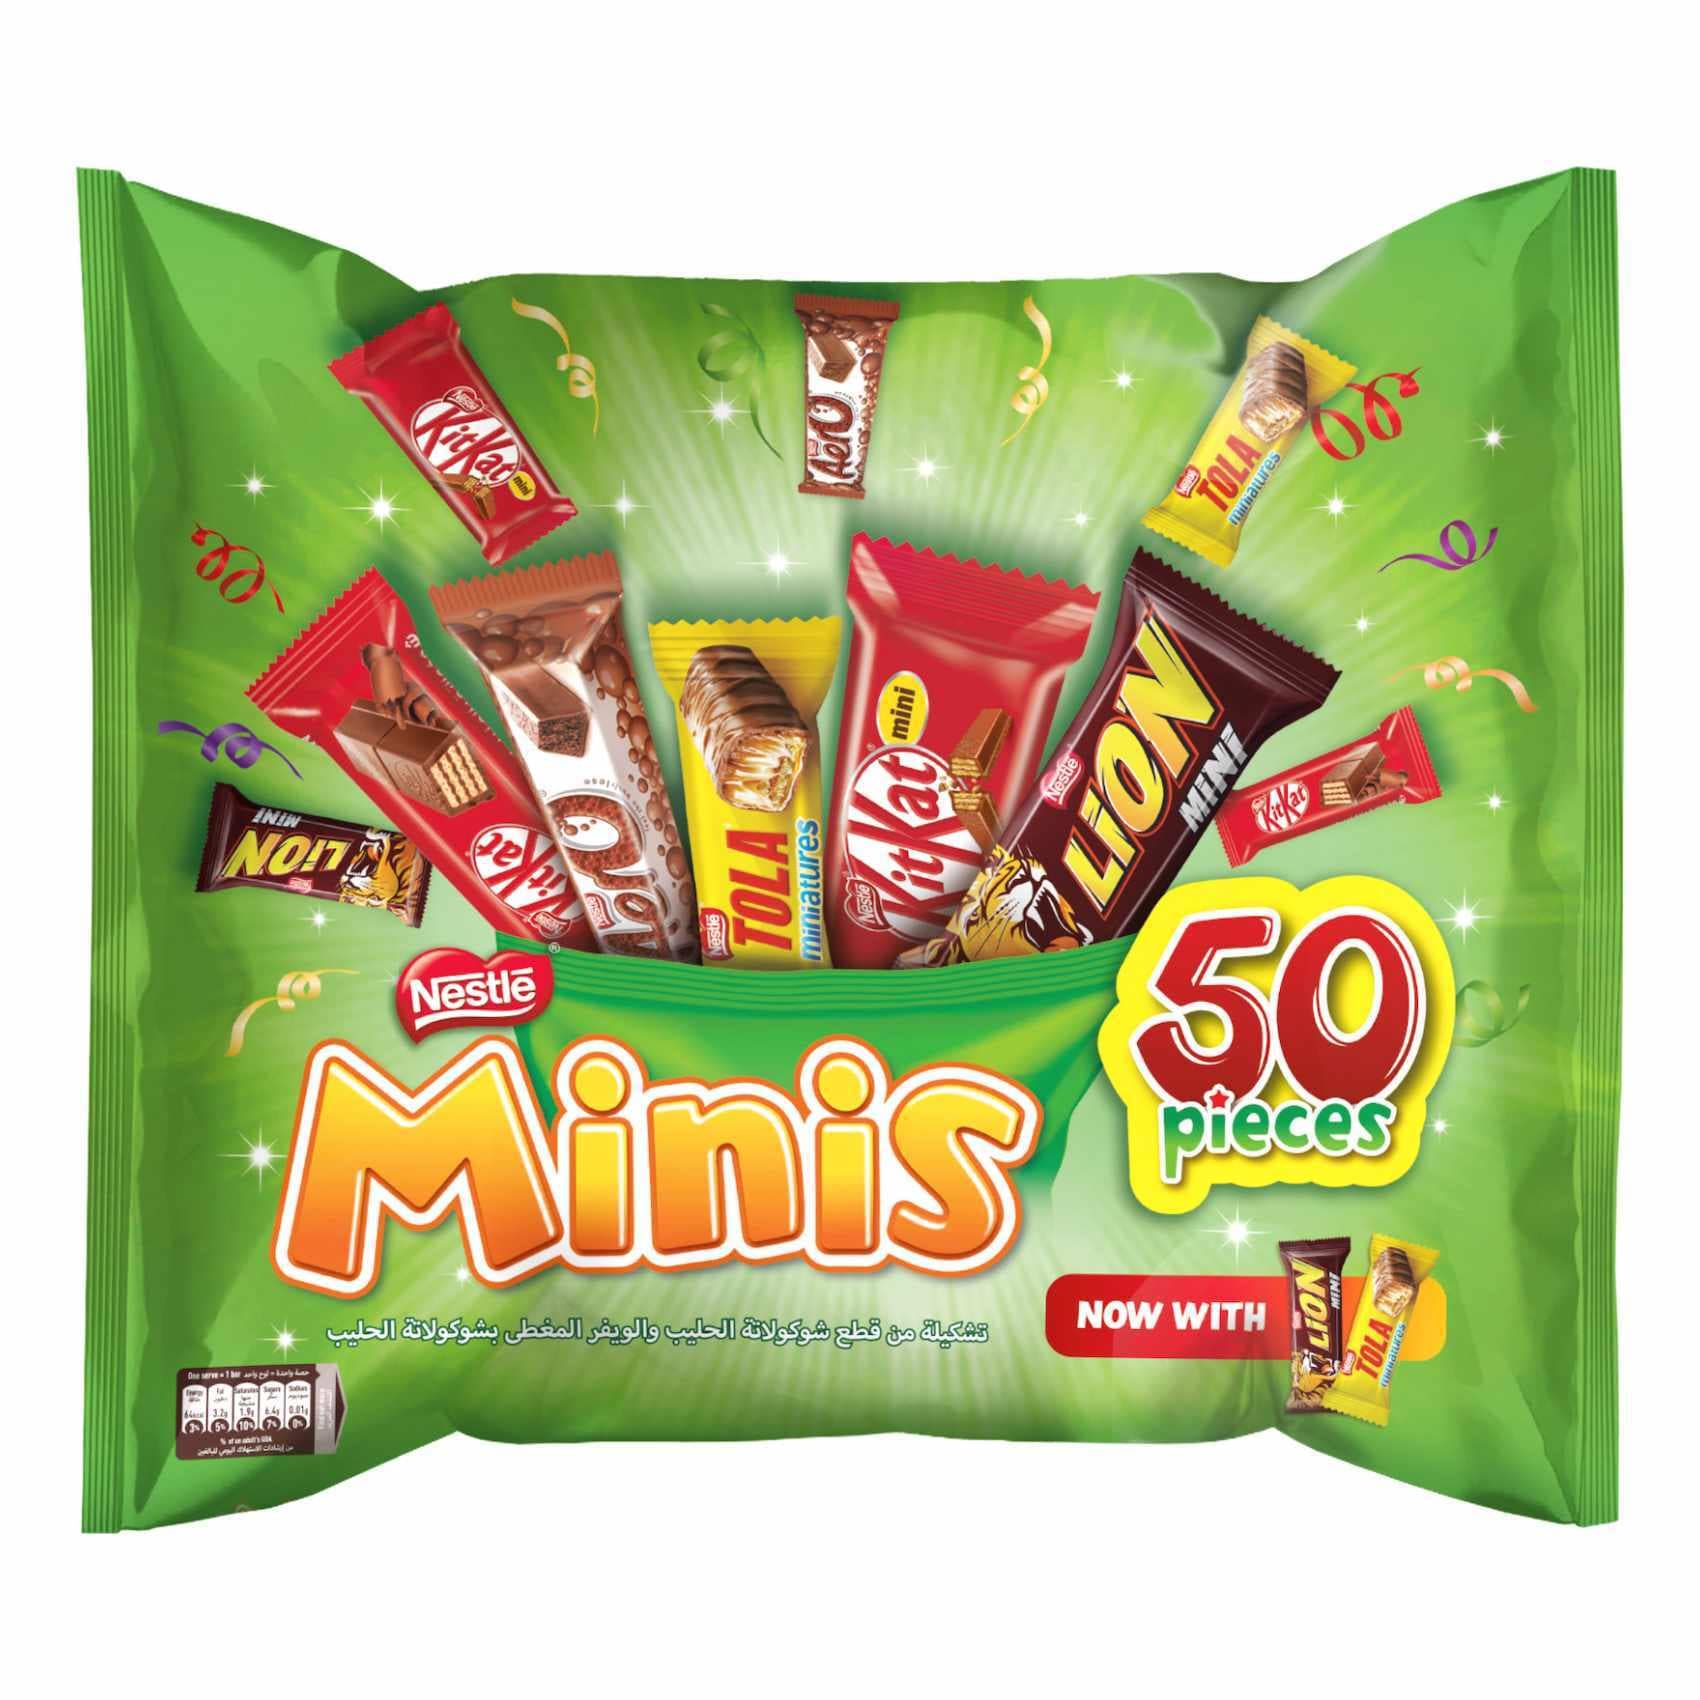 Buy Nestle Mini Mix on Food Chocolate Shop Online Cupboard Carrefour UAE 50 - Pieces 647g